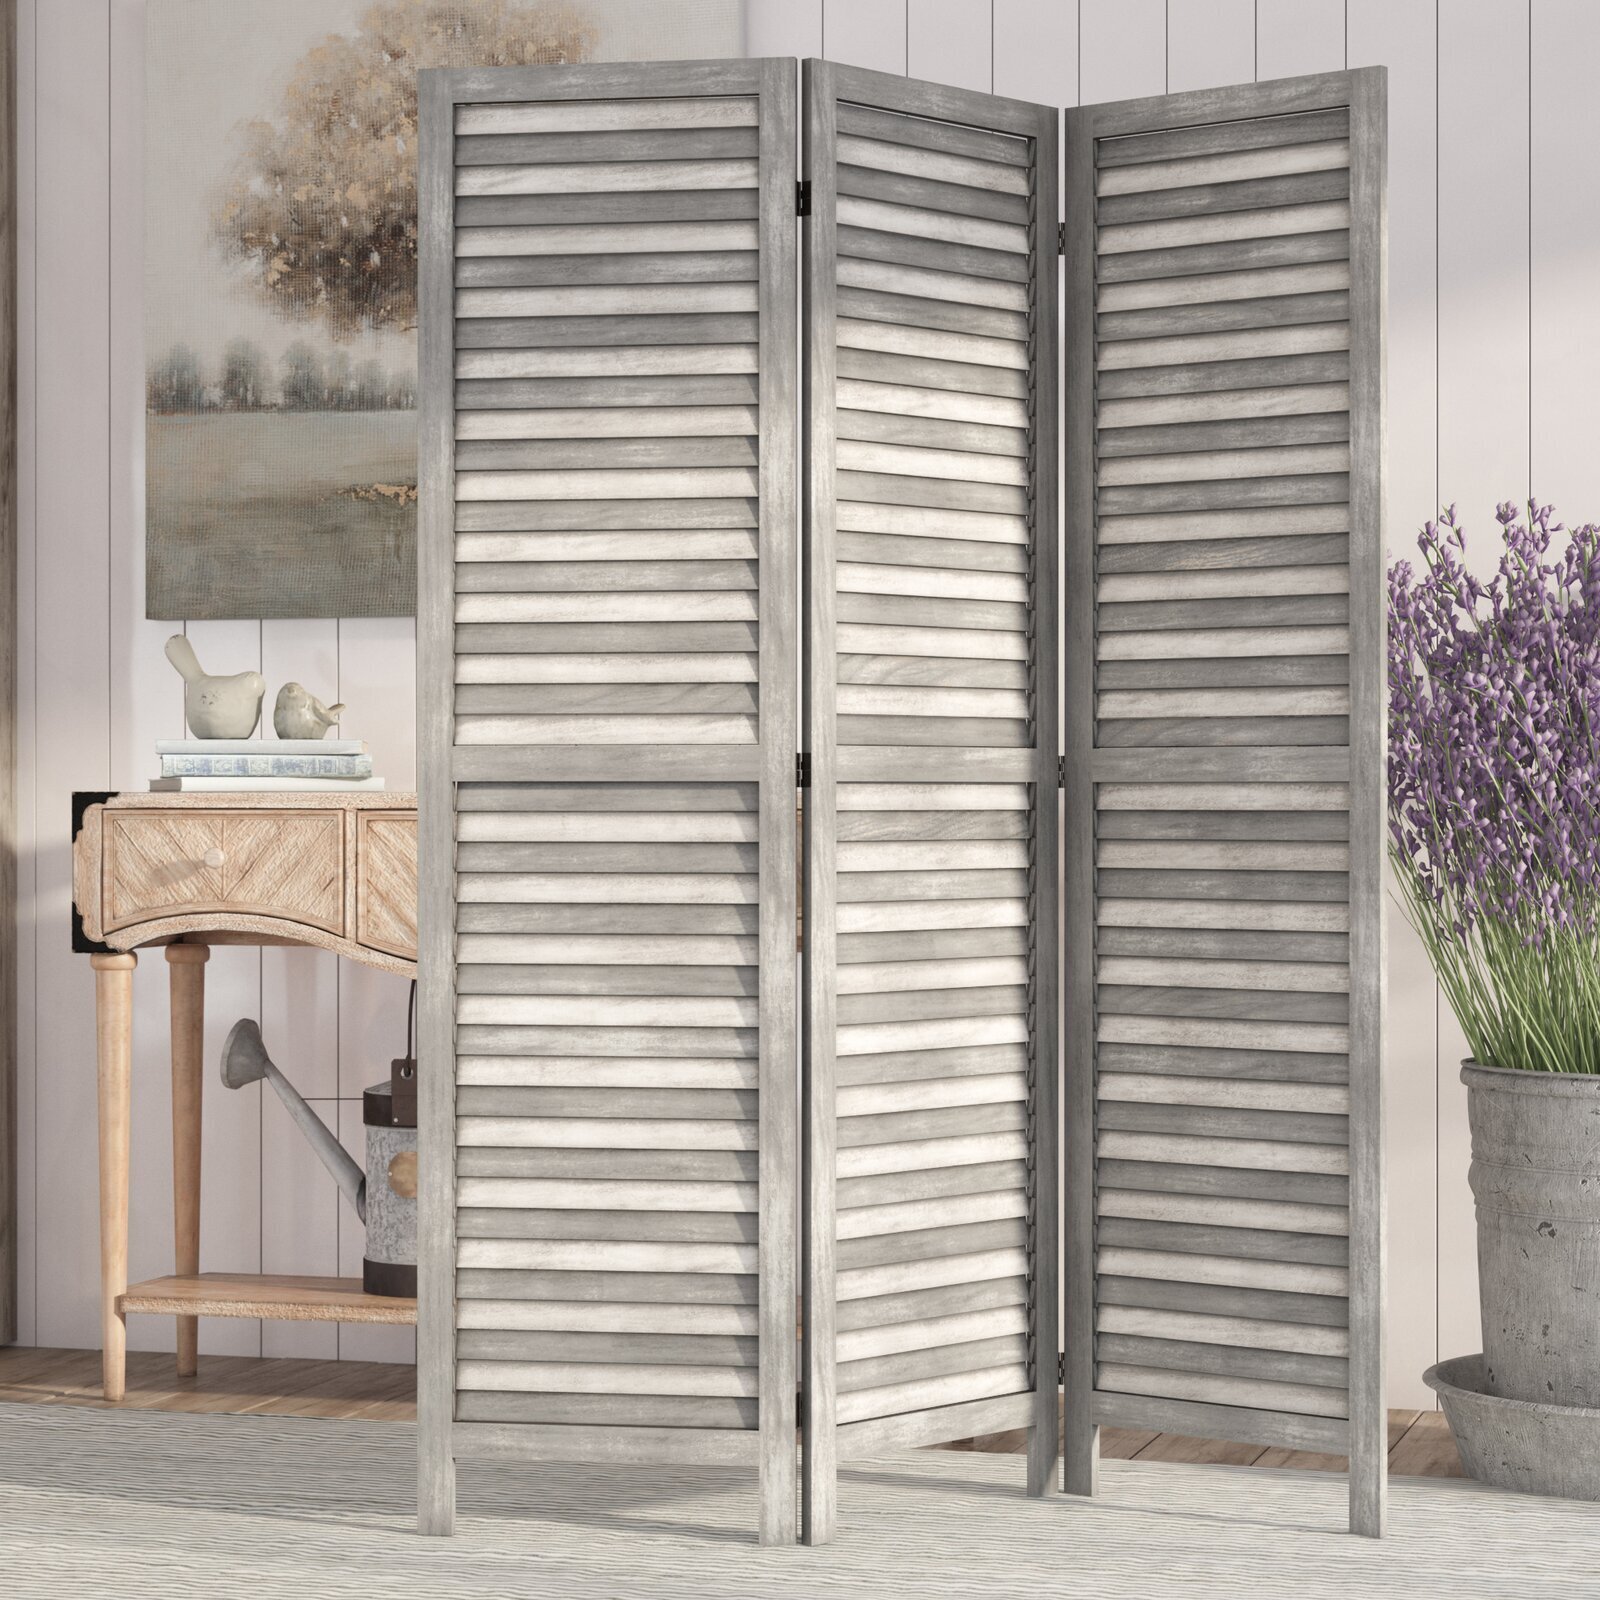 Beach Themed Wooden Fixed Room Dividers